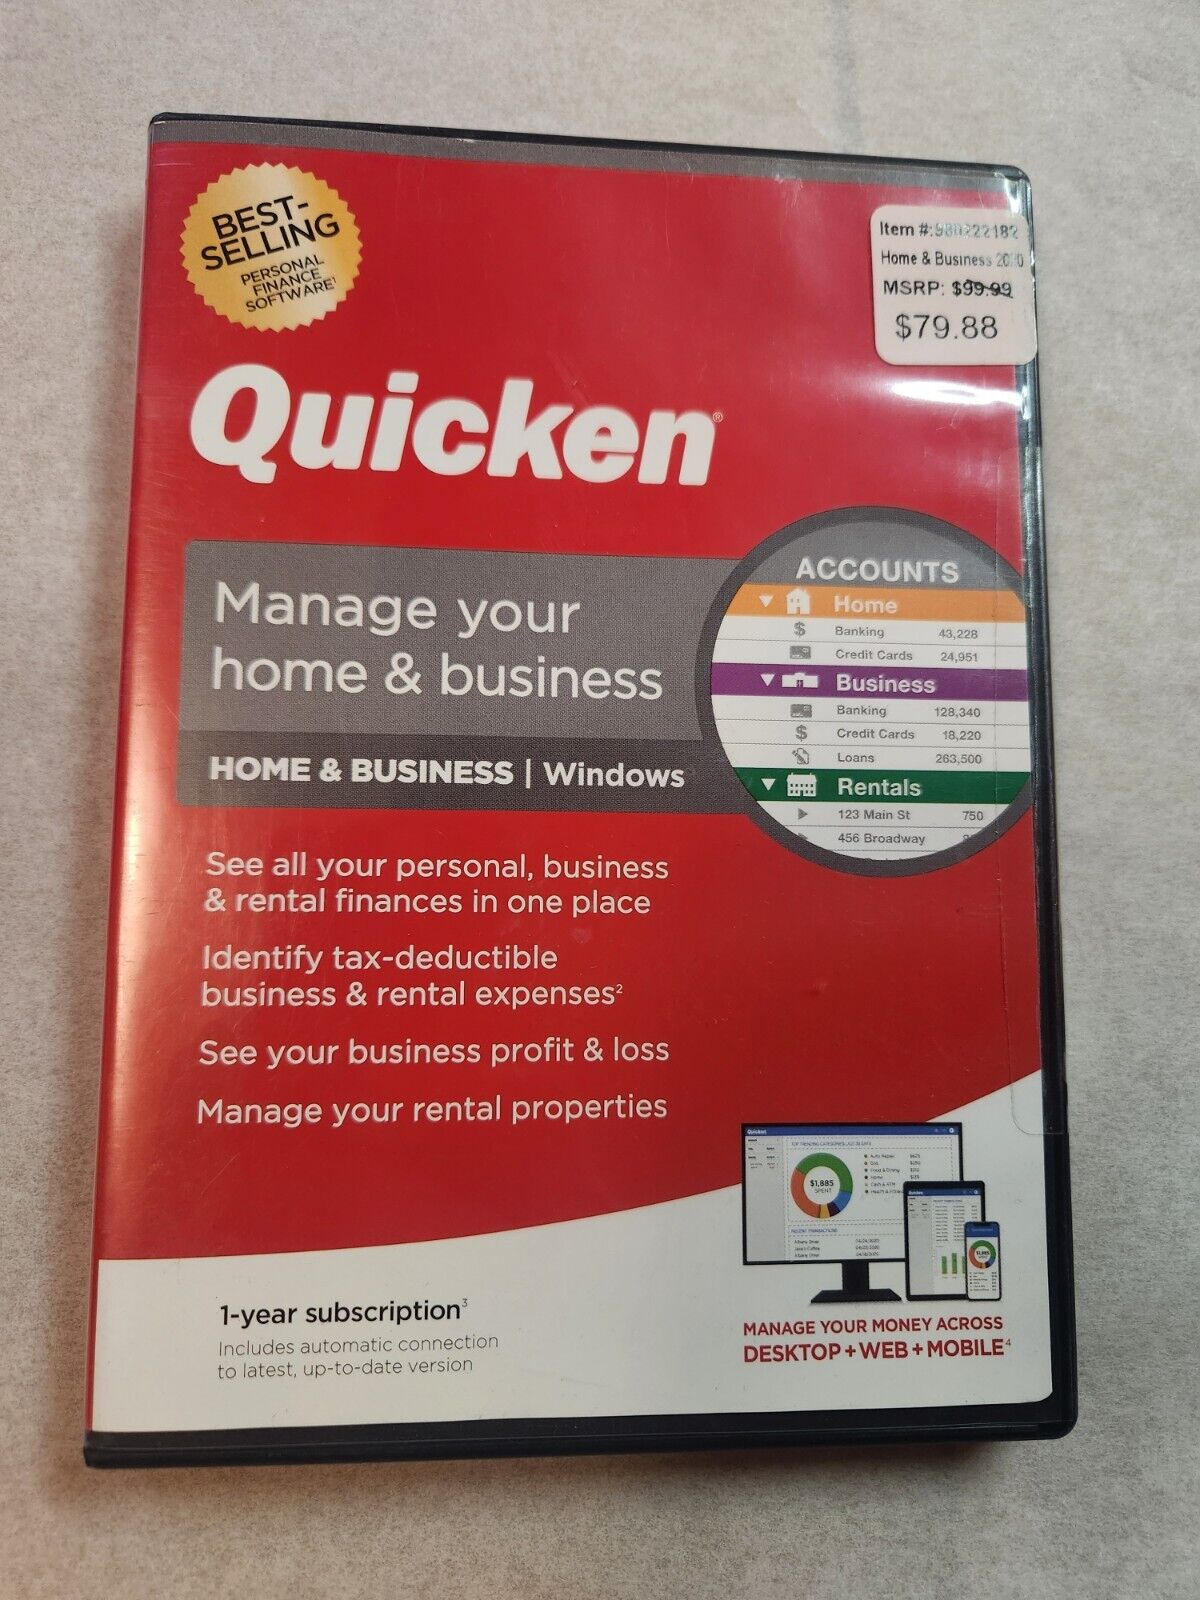 NEW Sealed Quicken Home & Business for Windows Software Desktop Web Mobile 1yr